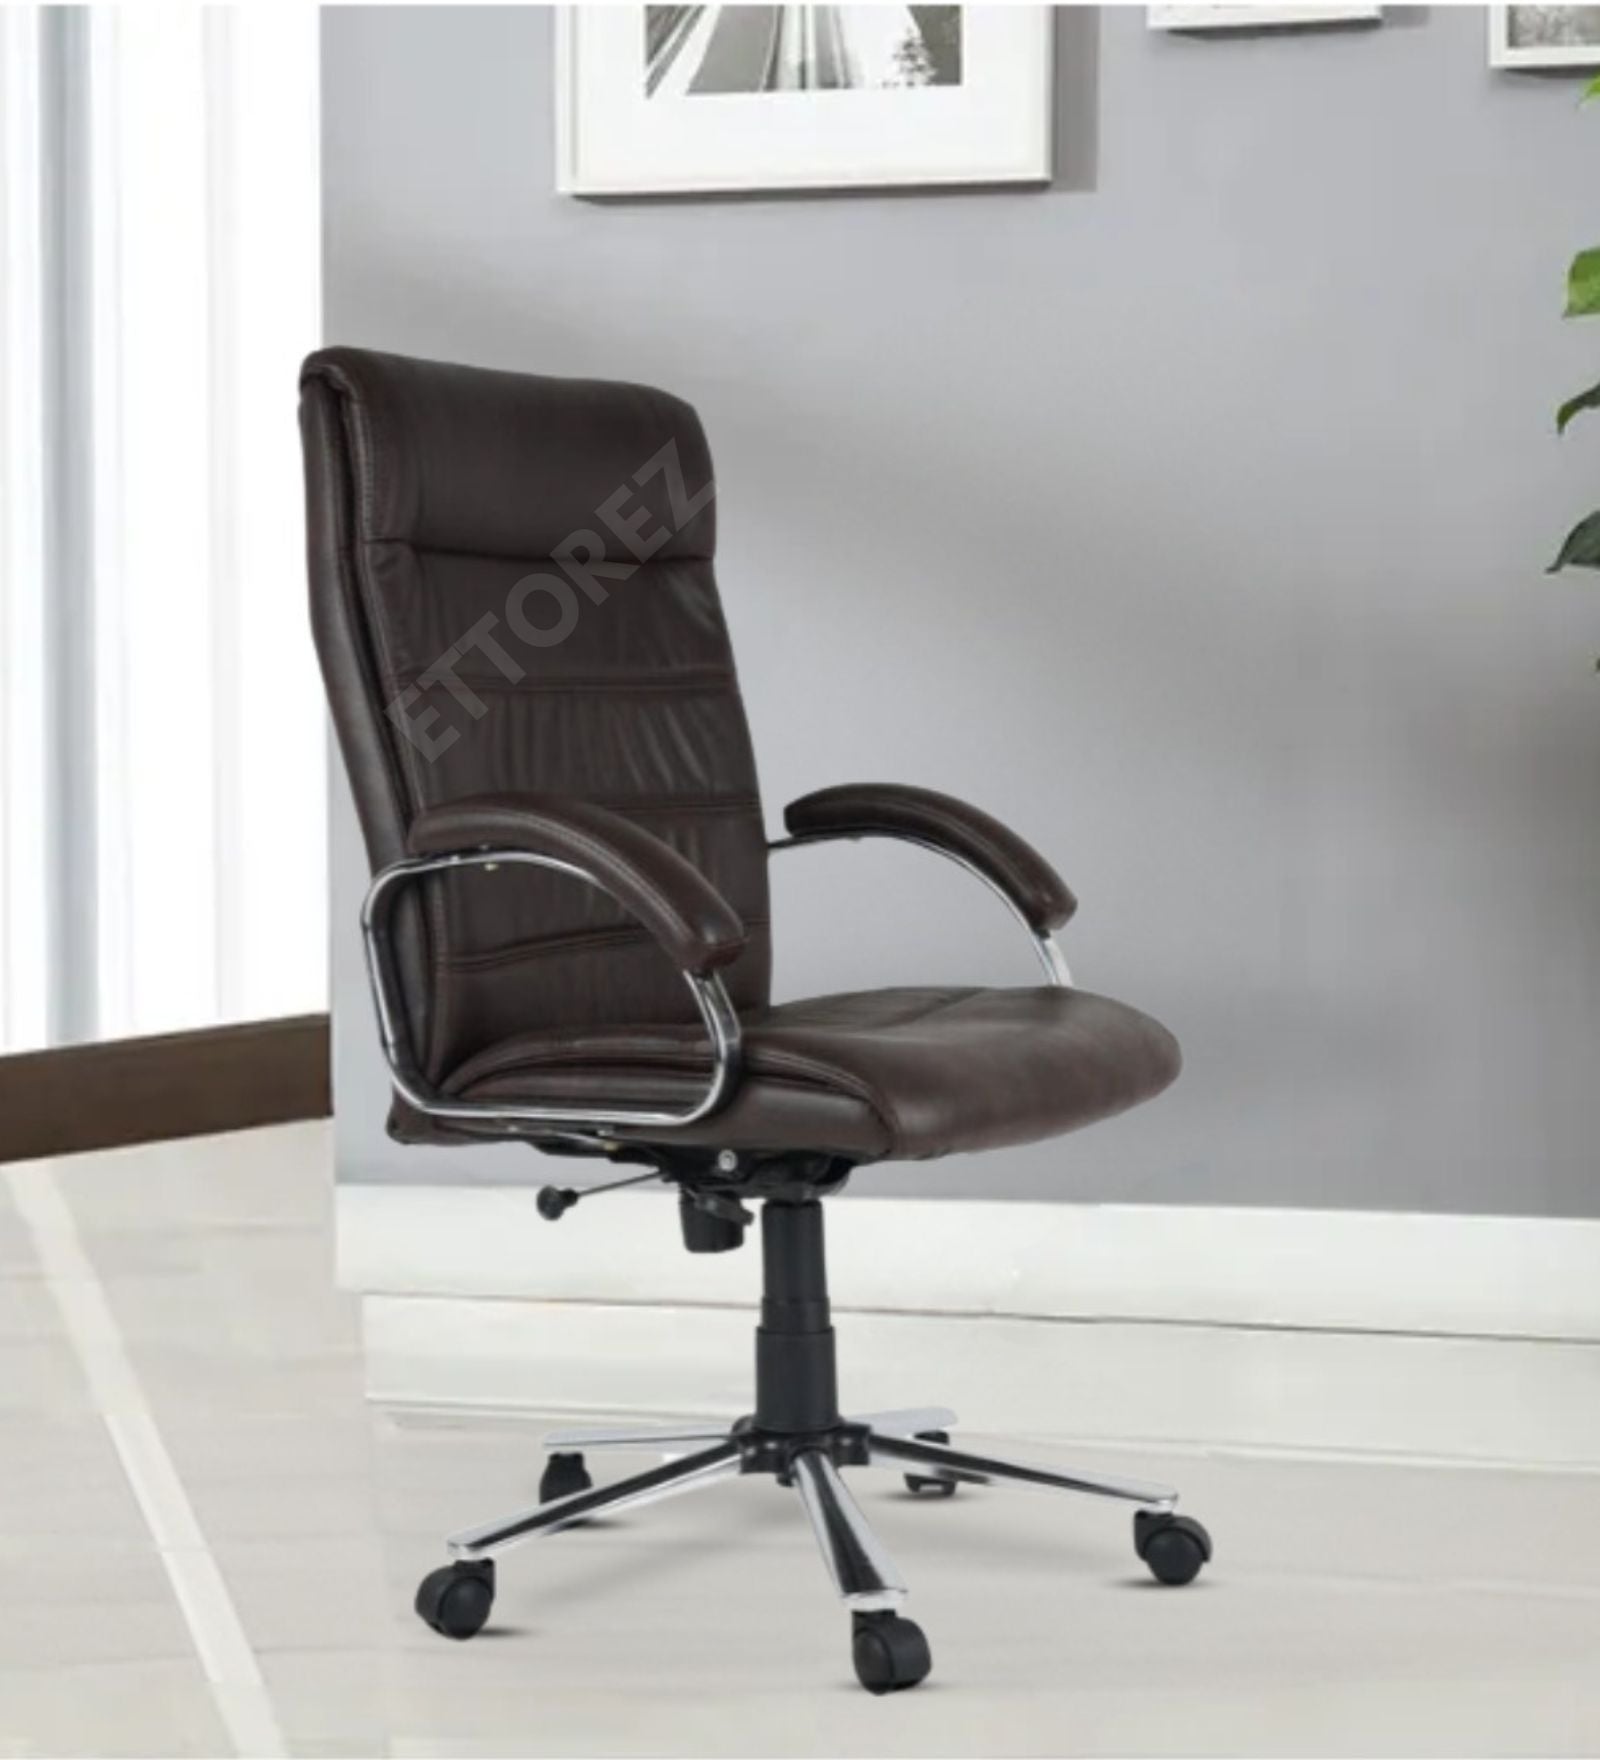 Ettorez A-ONE HB SERIES Executive Leatherette Office Chair